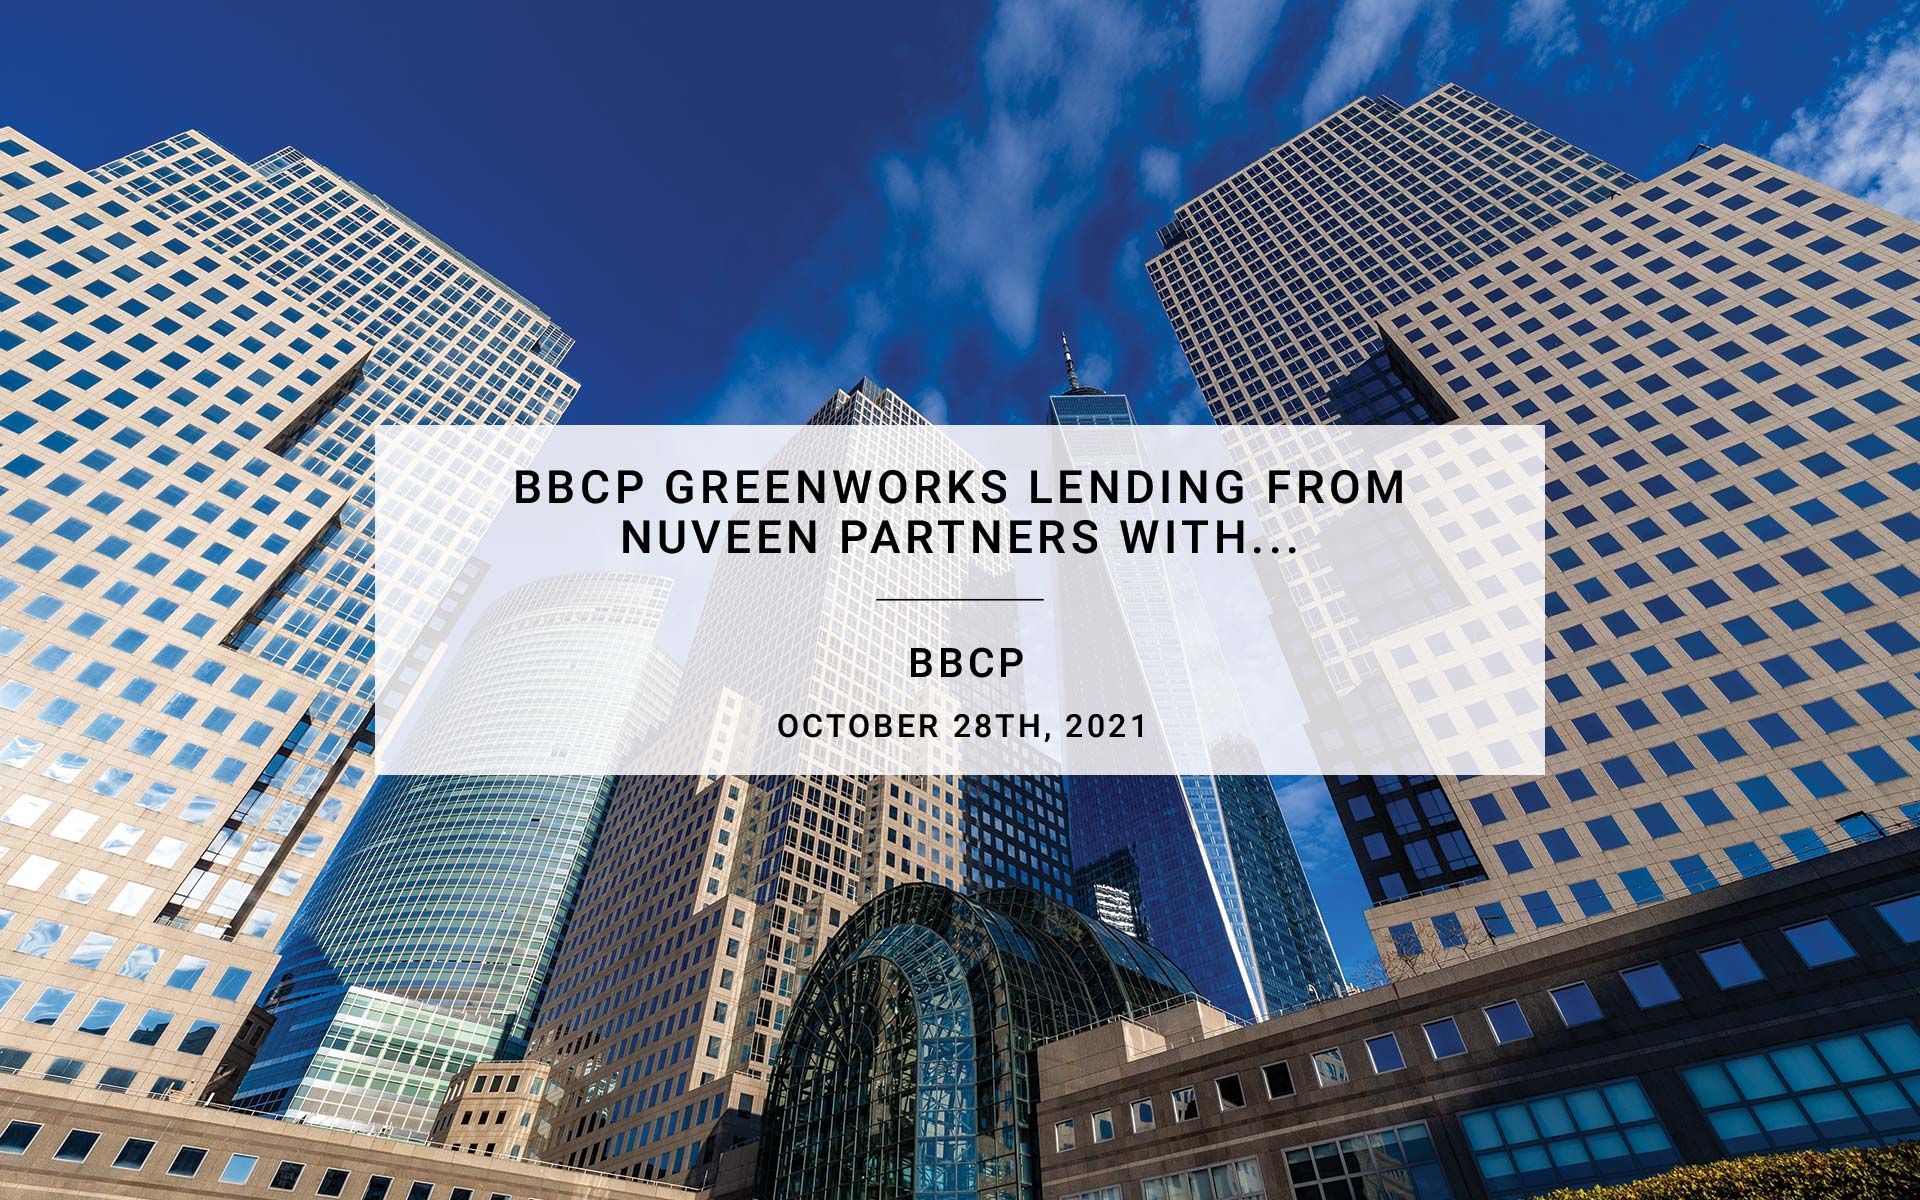 BBCP Greenworks lending from Nuveen Partners with | BBCP